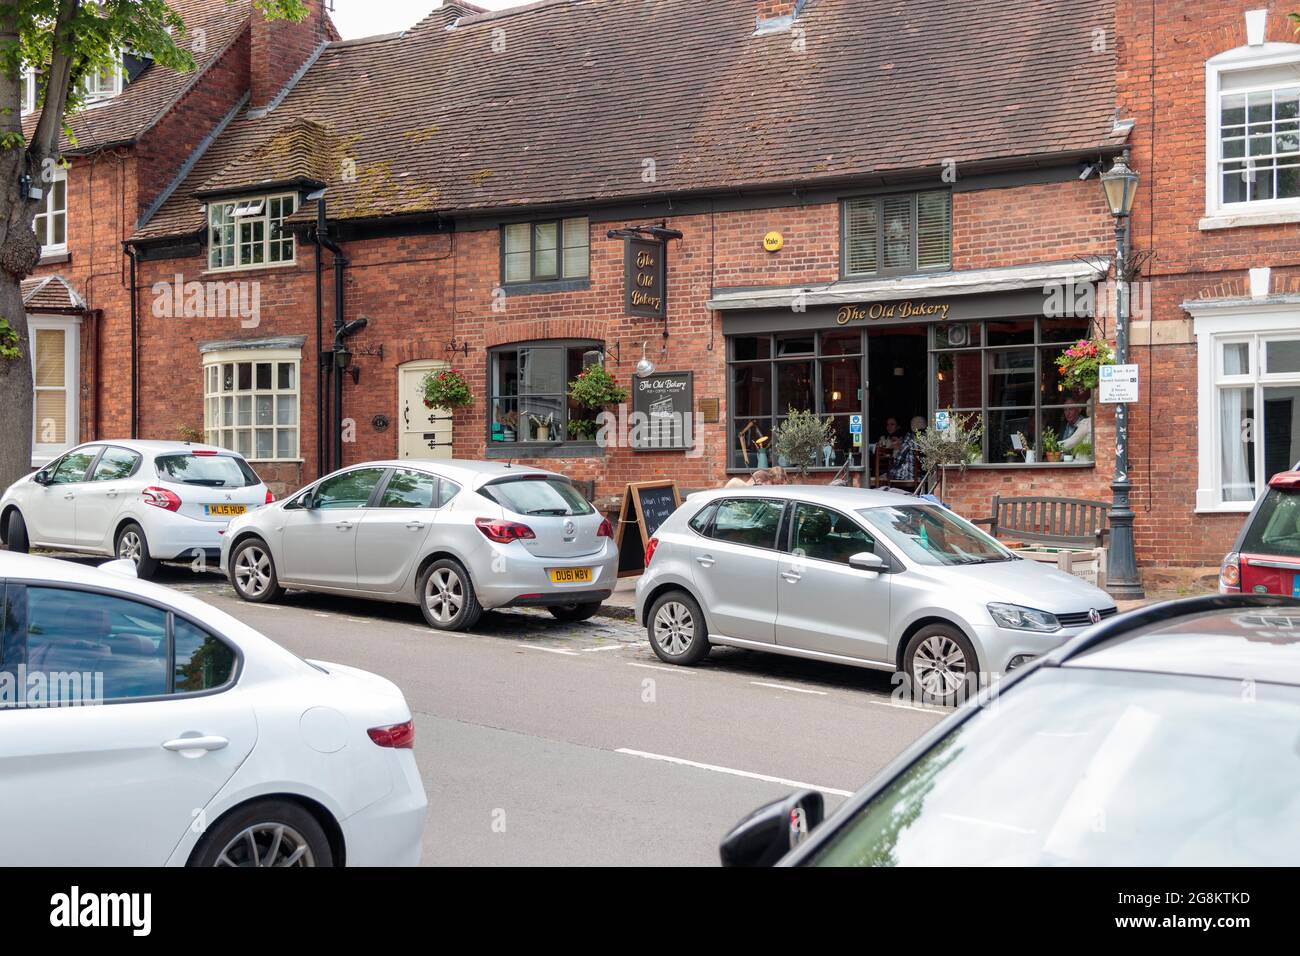 KENILWORTH, WARWICKSHIRE, UNITED KINGDOM - MAY 29, 2021: View of ‘The Old Bakery’. High Street Stock Photo